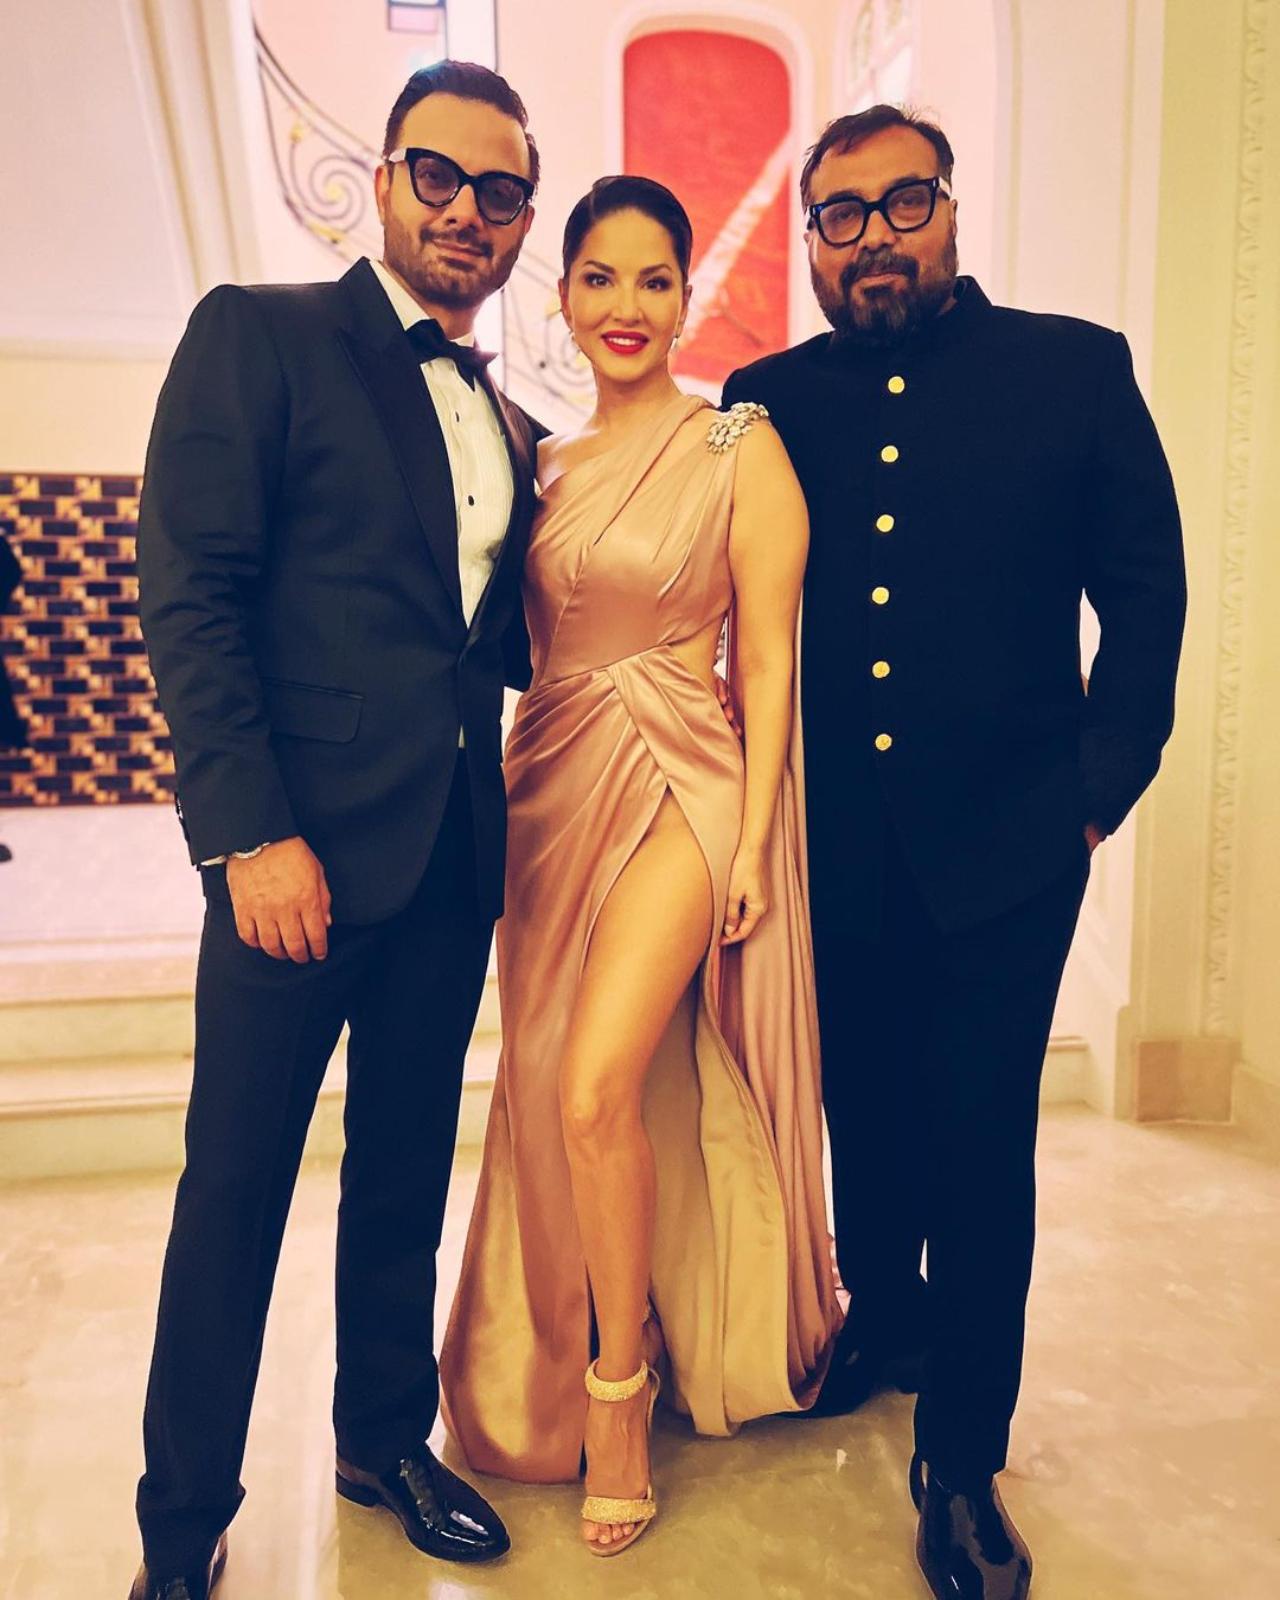 Sunny Leone who was seen basking in the glorious moment took to her Instagram account and shared her red carpet look which she captioned, 